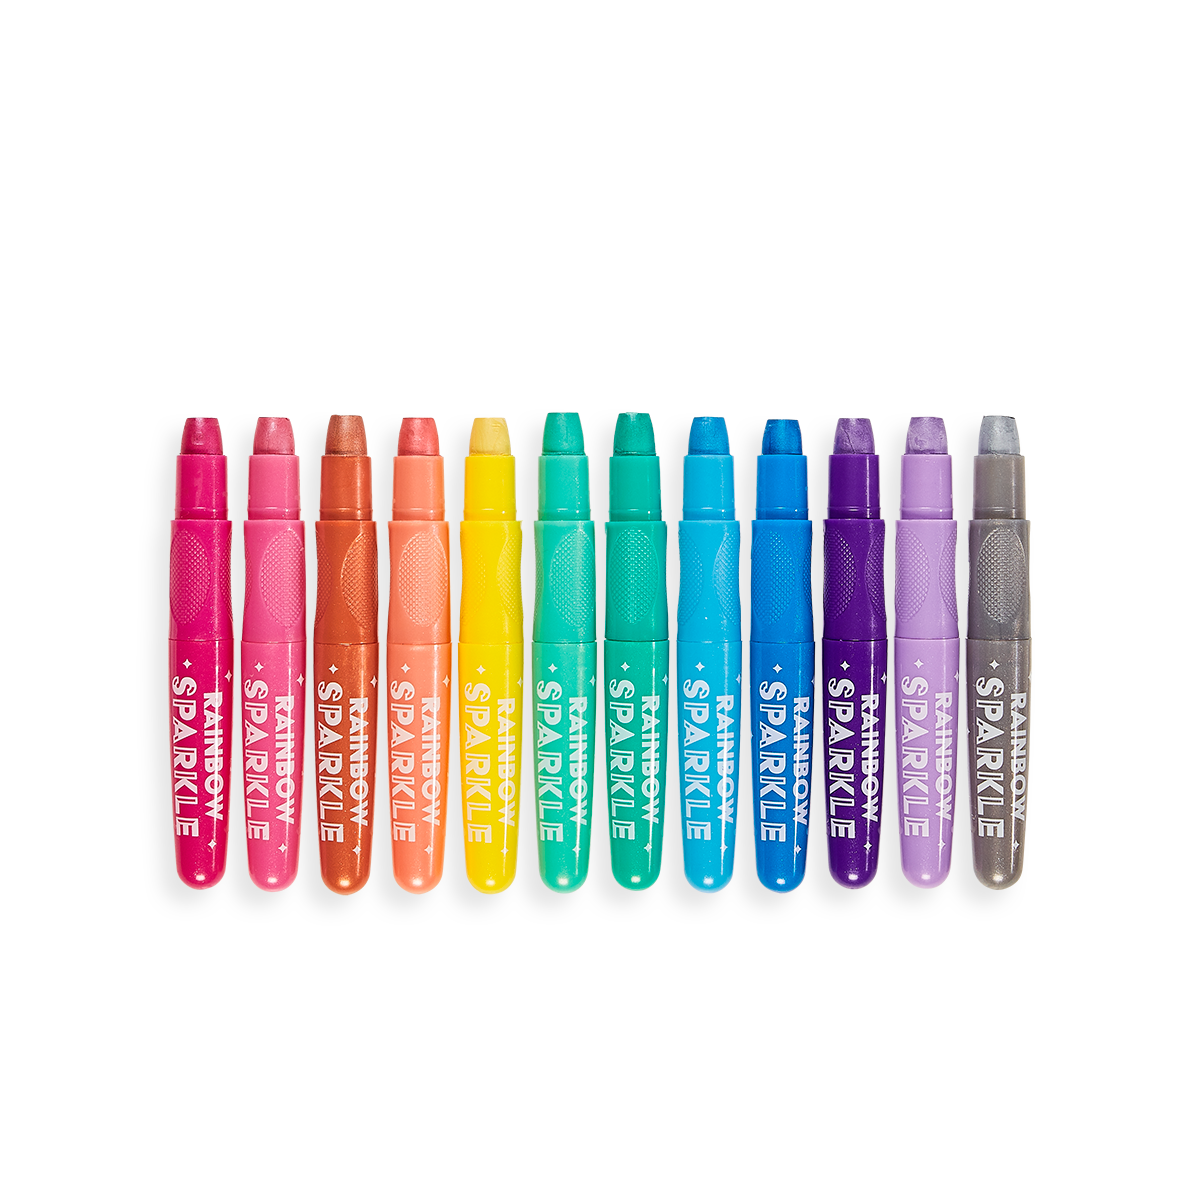 All 12 colors of the Rainbow Sparkle watercolor gel crayons in a row